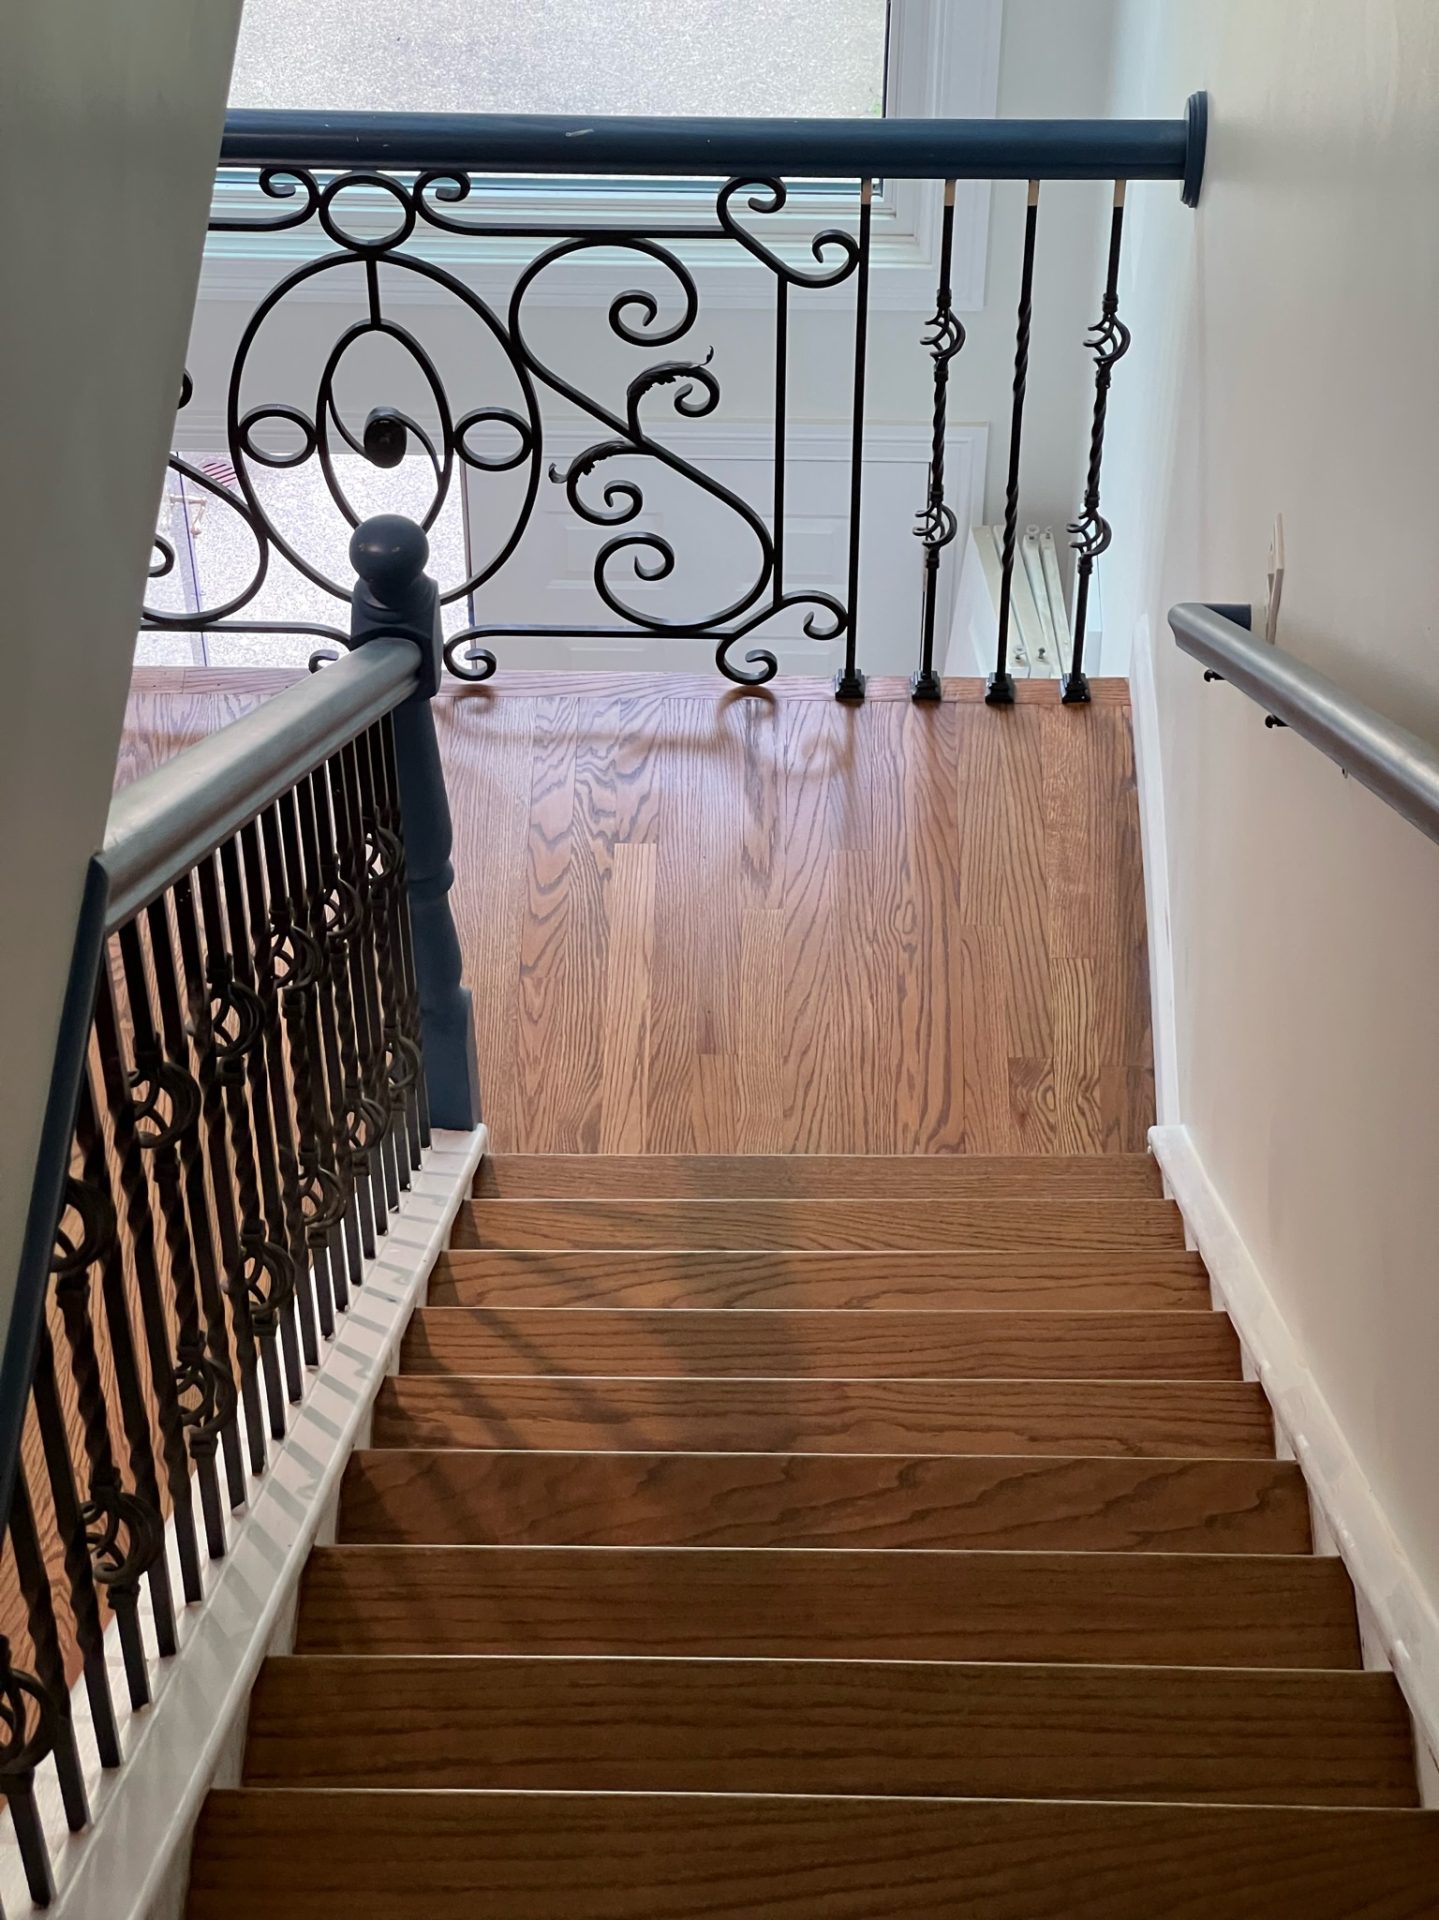 REFINISHING HARDWOOD FLOORS AND STAIRS IN LITTLE ITALY, CHICAGO